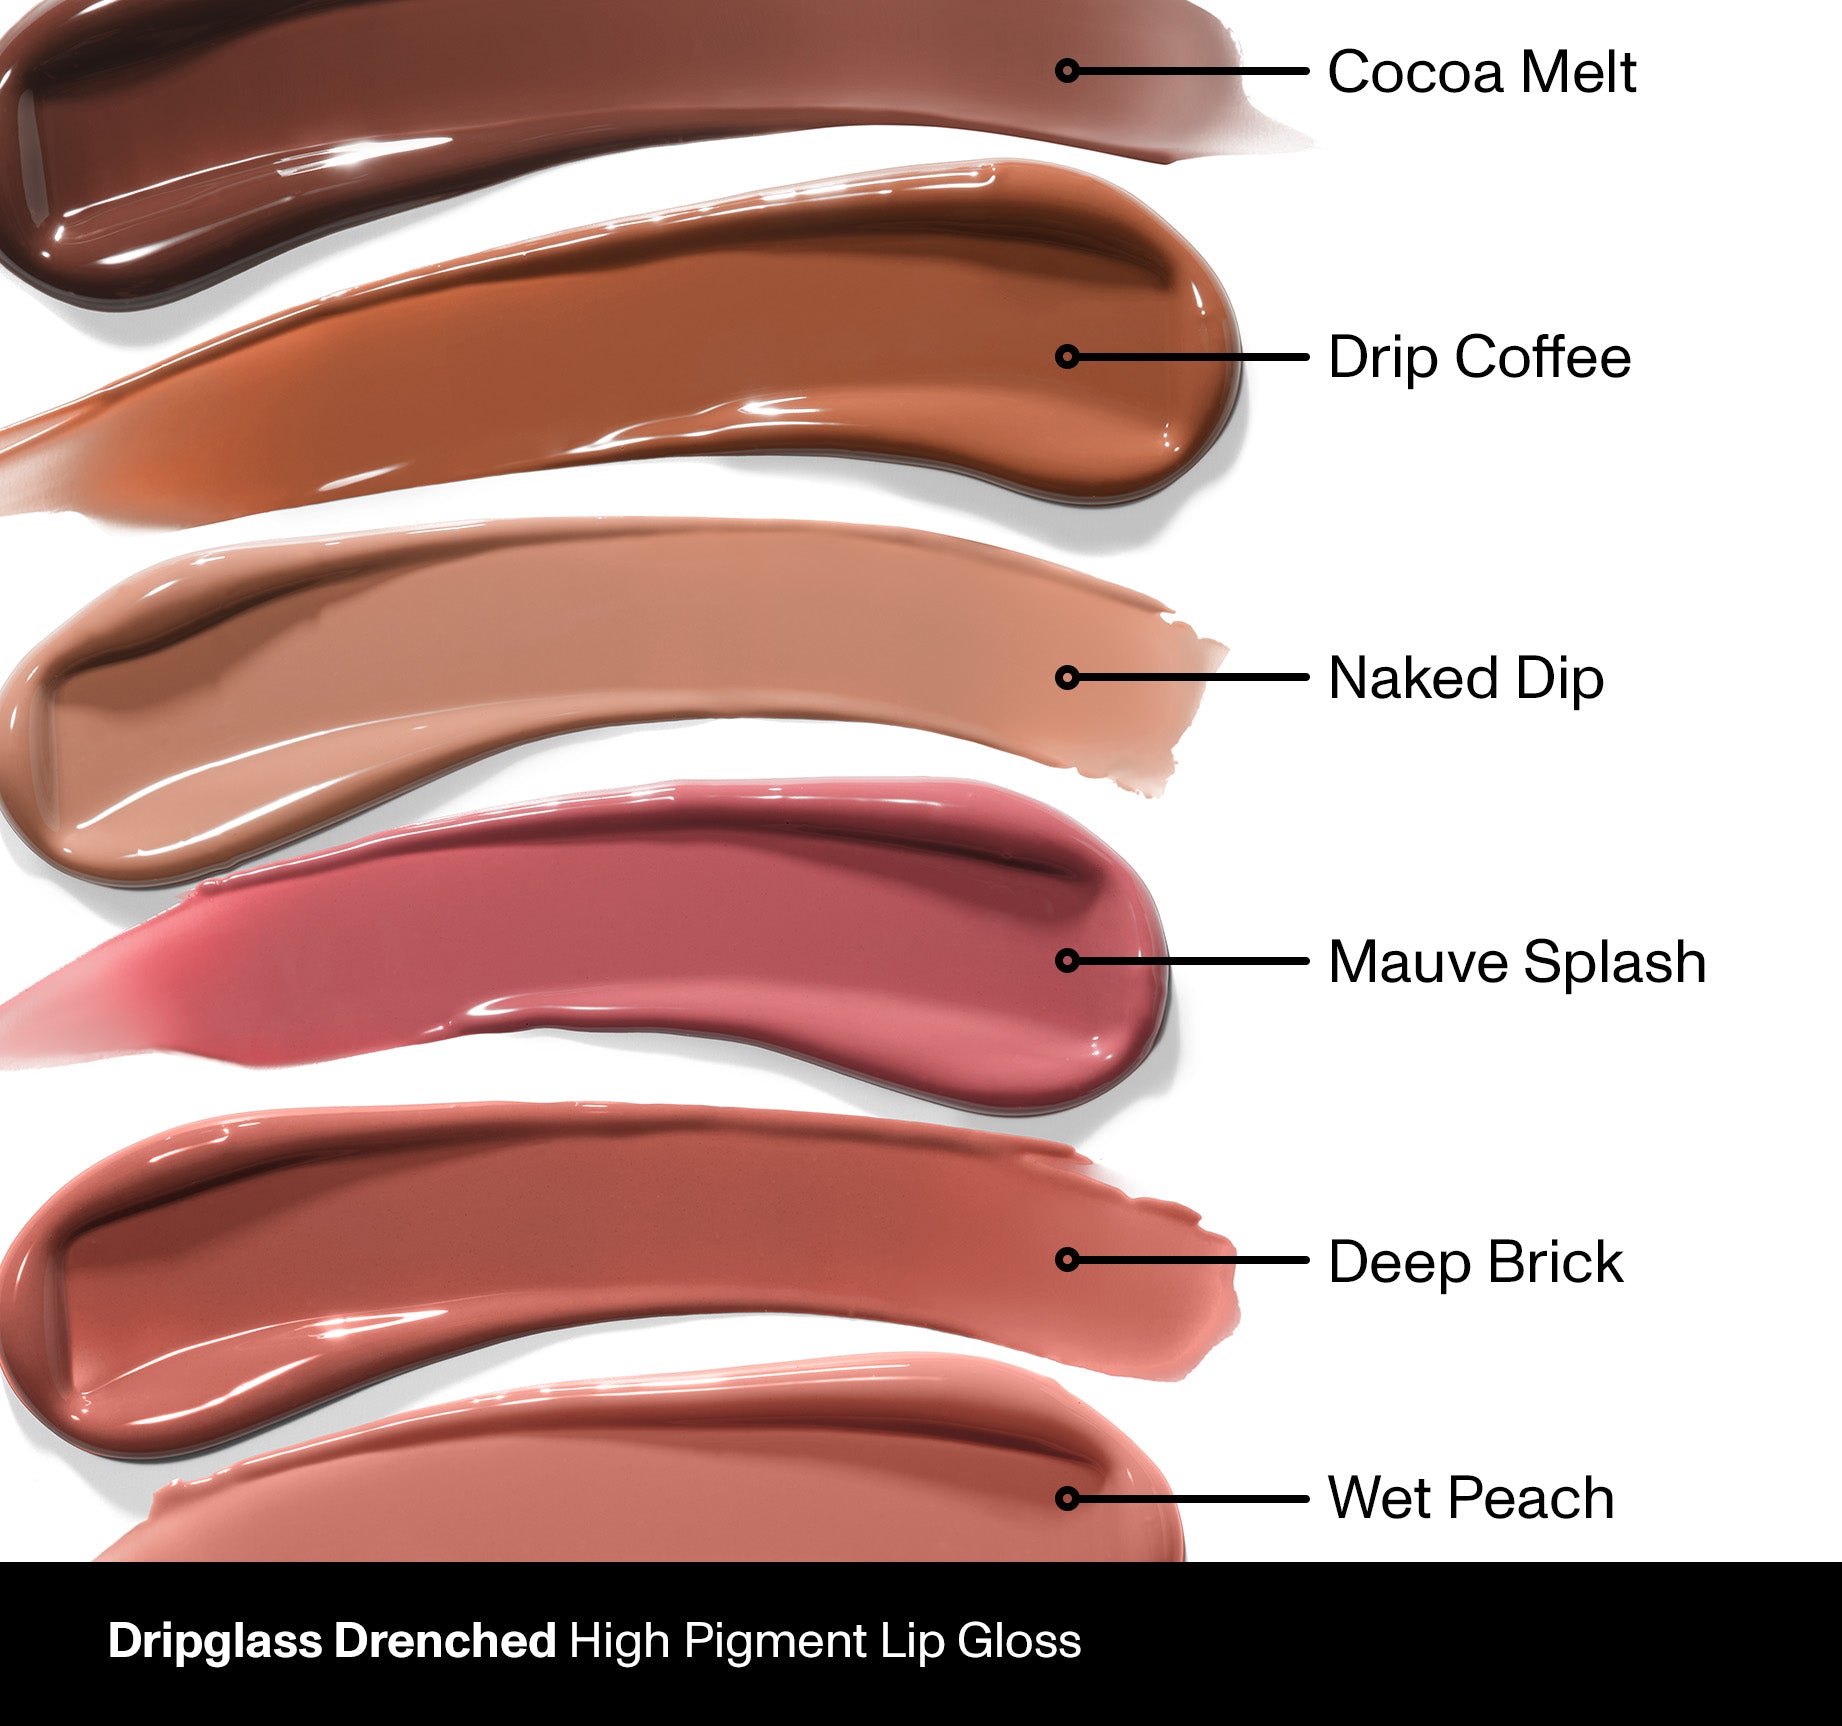 Dripglass Drenched High Pigment Lip Gloss - Cocoa Melt - Image 4